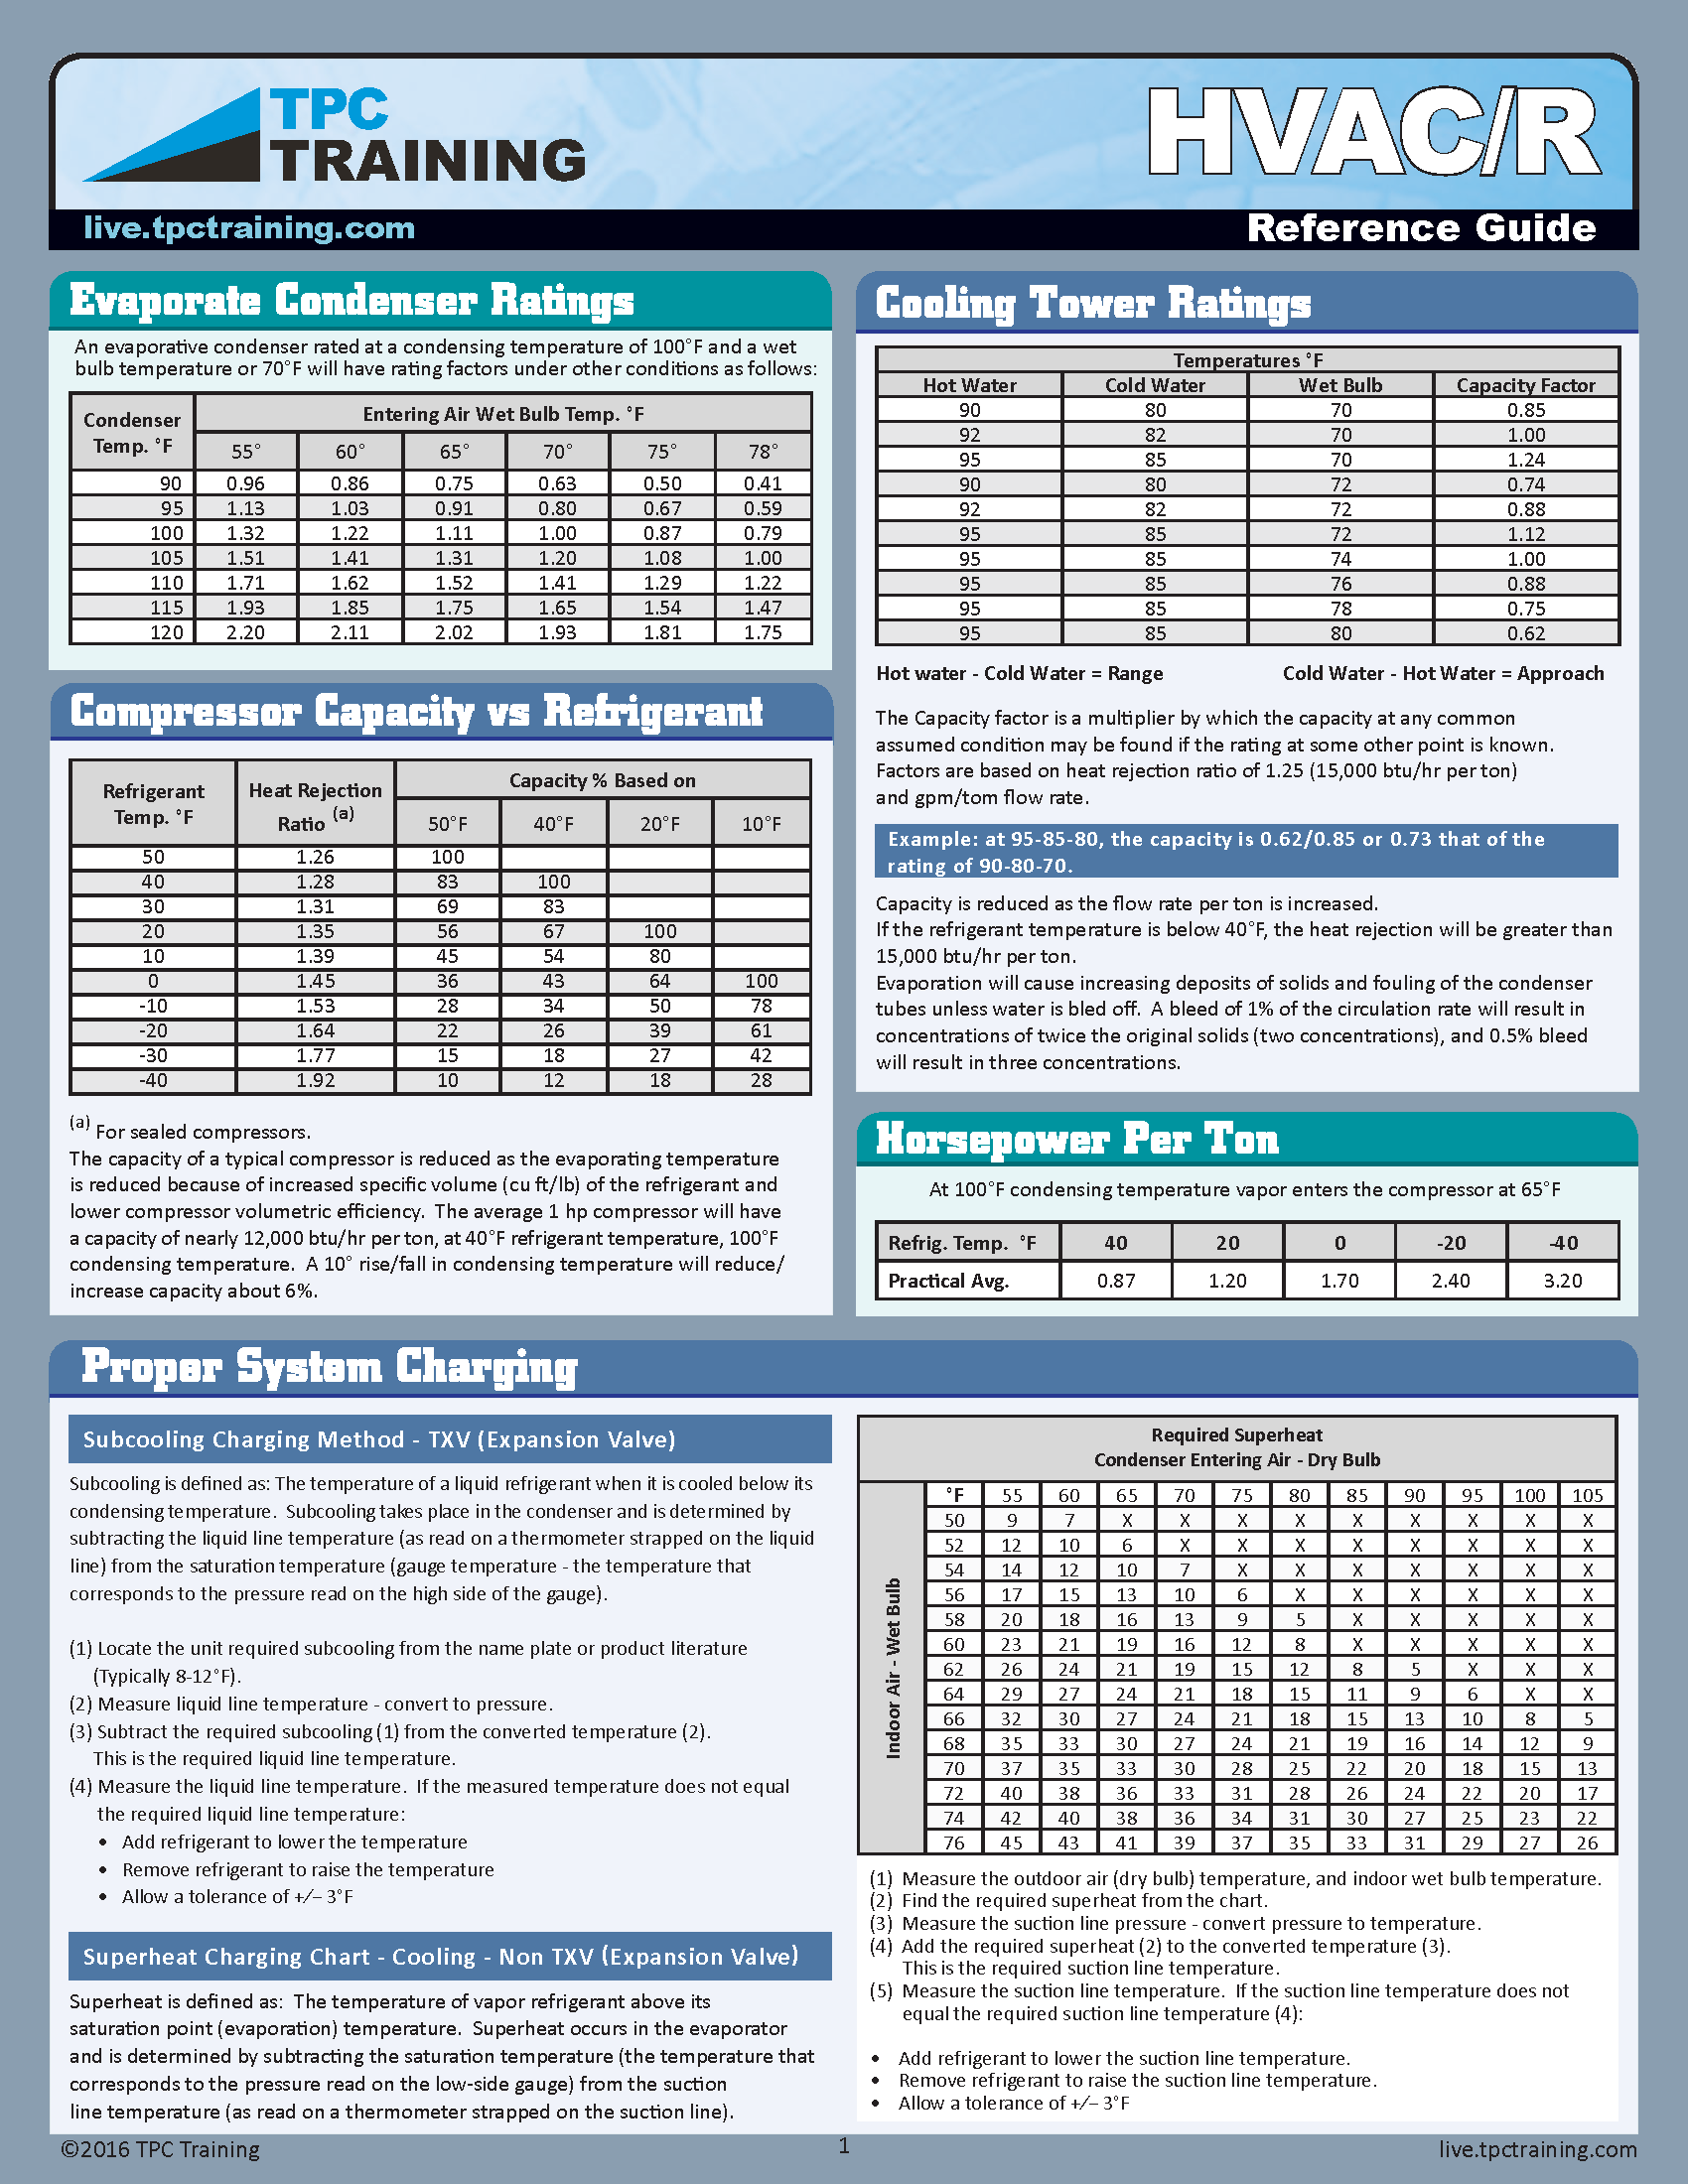 HVAC Quick Reference Cards for Refrigerant Charging and Troubleshooting 